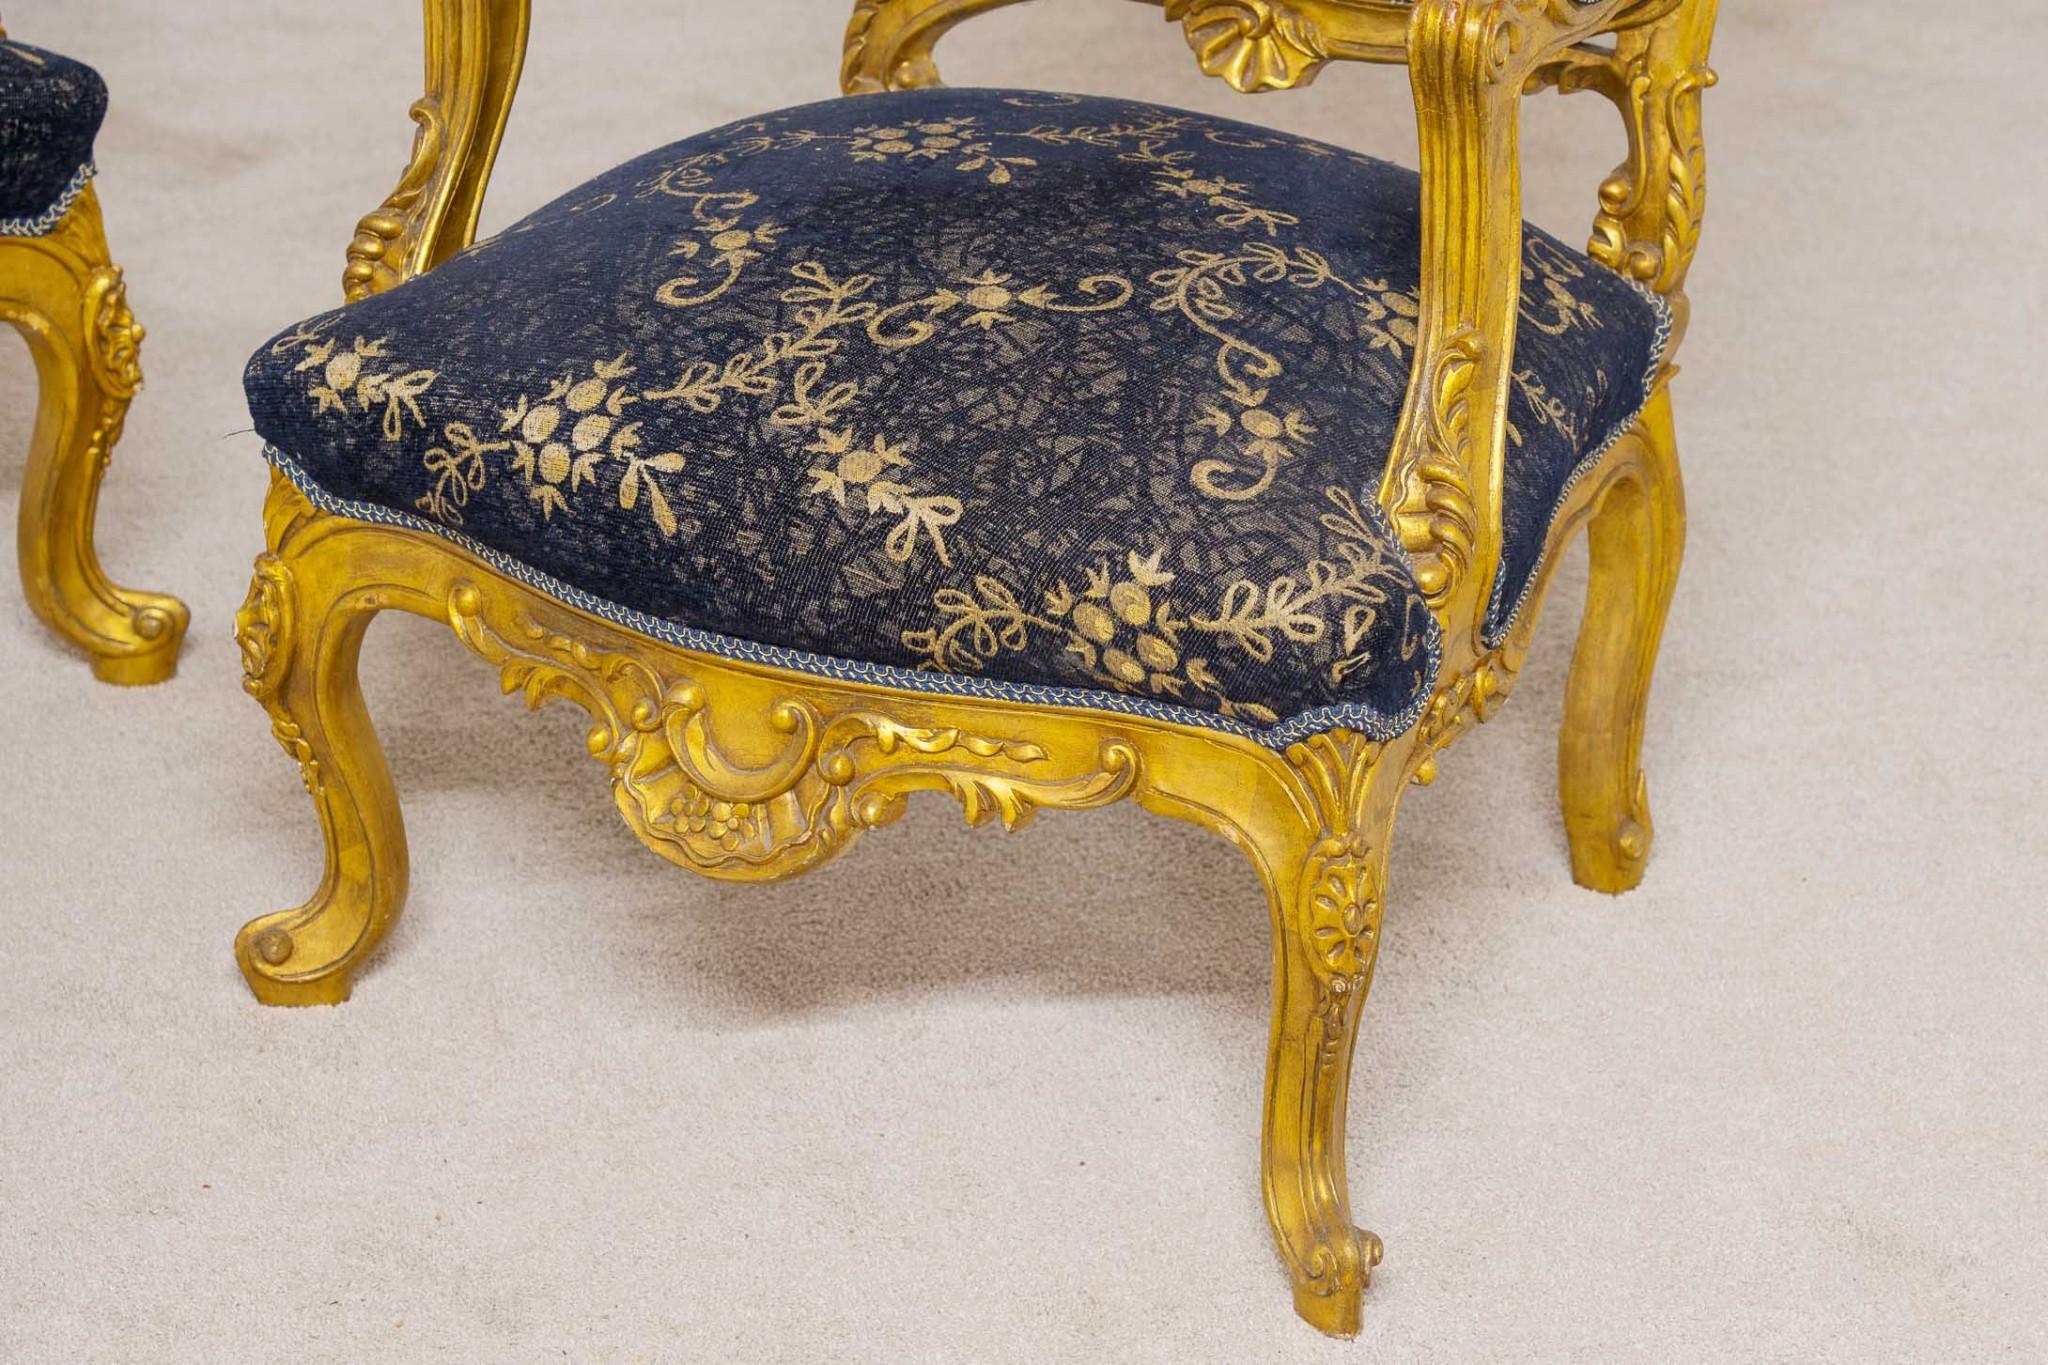 Stylish pair of French Rococo gilt arm chairs
Very wide arms so comfortable to sit in
Ornately carved frames are very detailed with floral motifs
Reupholstered with floral print so clean and odour free
Circa 1920
Bought from a dealer on Marche Biron